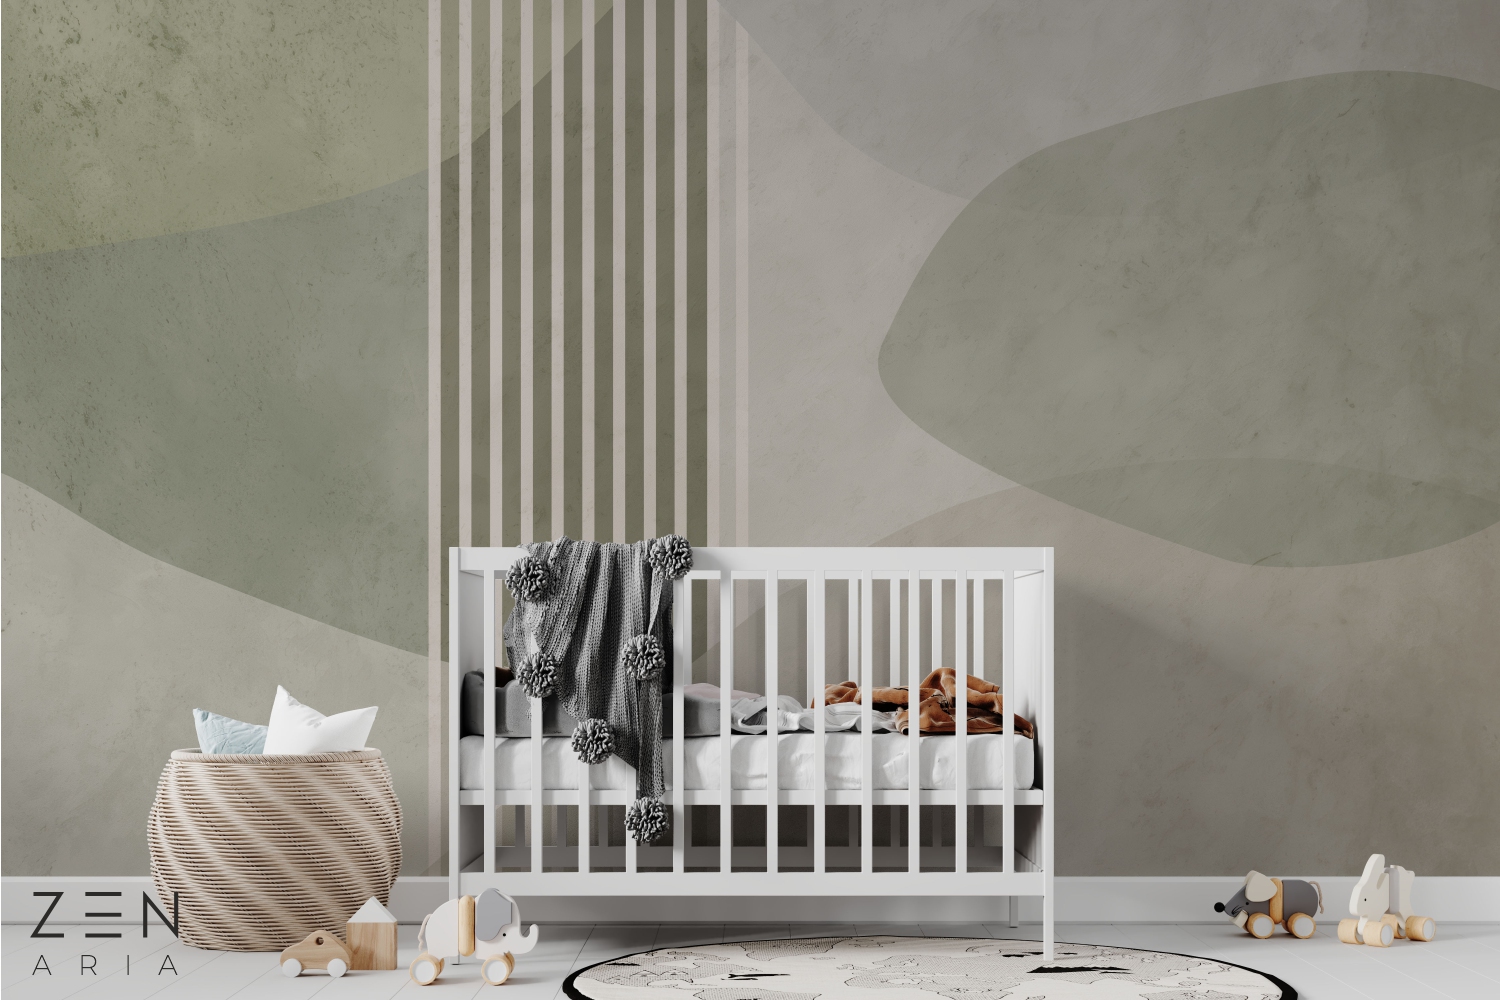 Line and Forms Linii si Forme Mural Wallpaper Fototapet Personalizat Zenaria Tapet Echo Lines